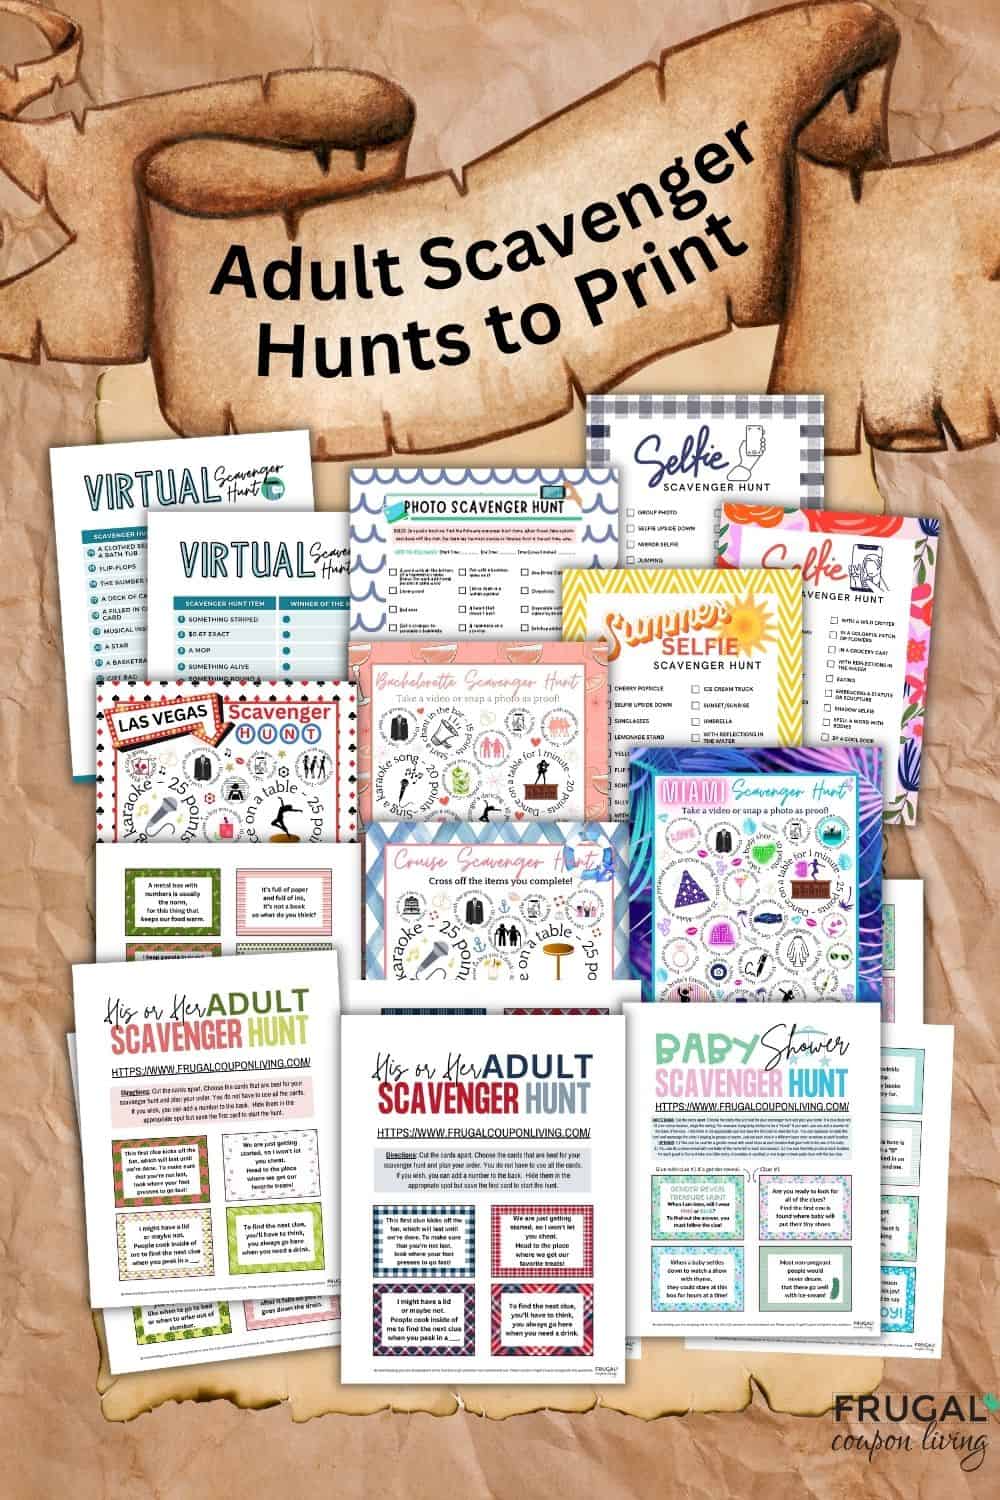 examples of adult scavenger hunt ideas to buy